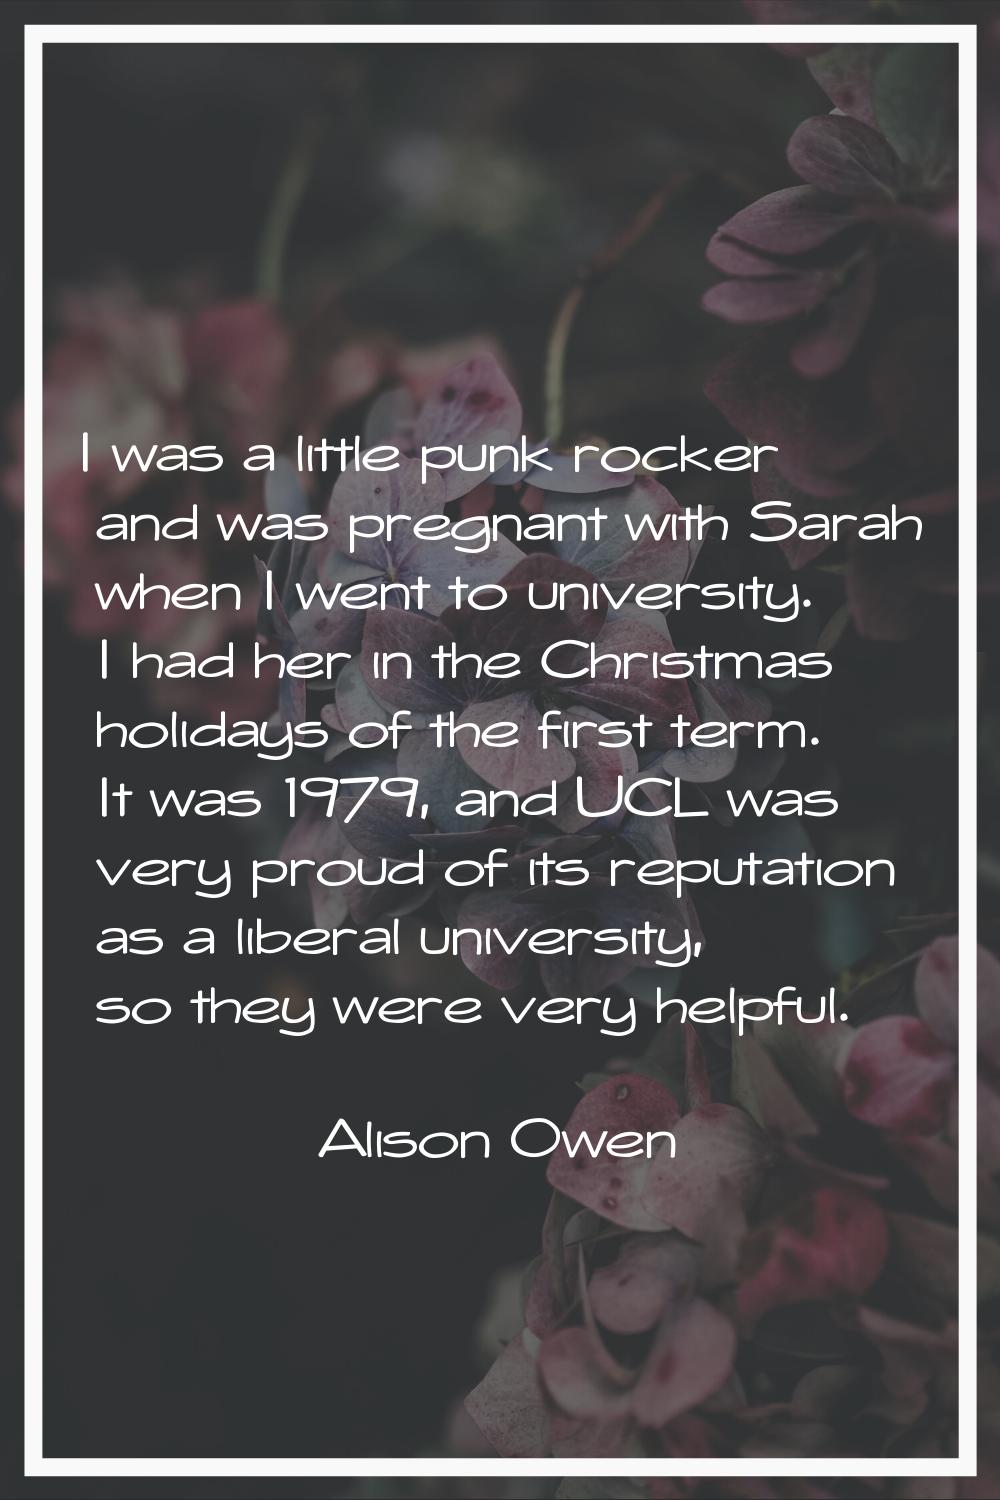 I was a little punk rocker and was pregnant with Sarah when I went to university. I had her in the 